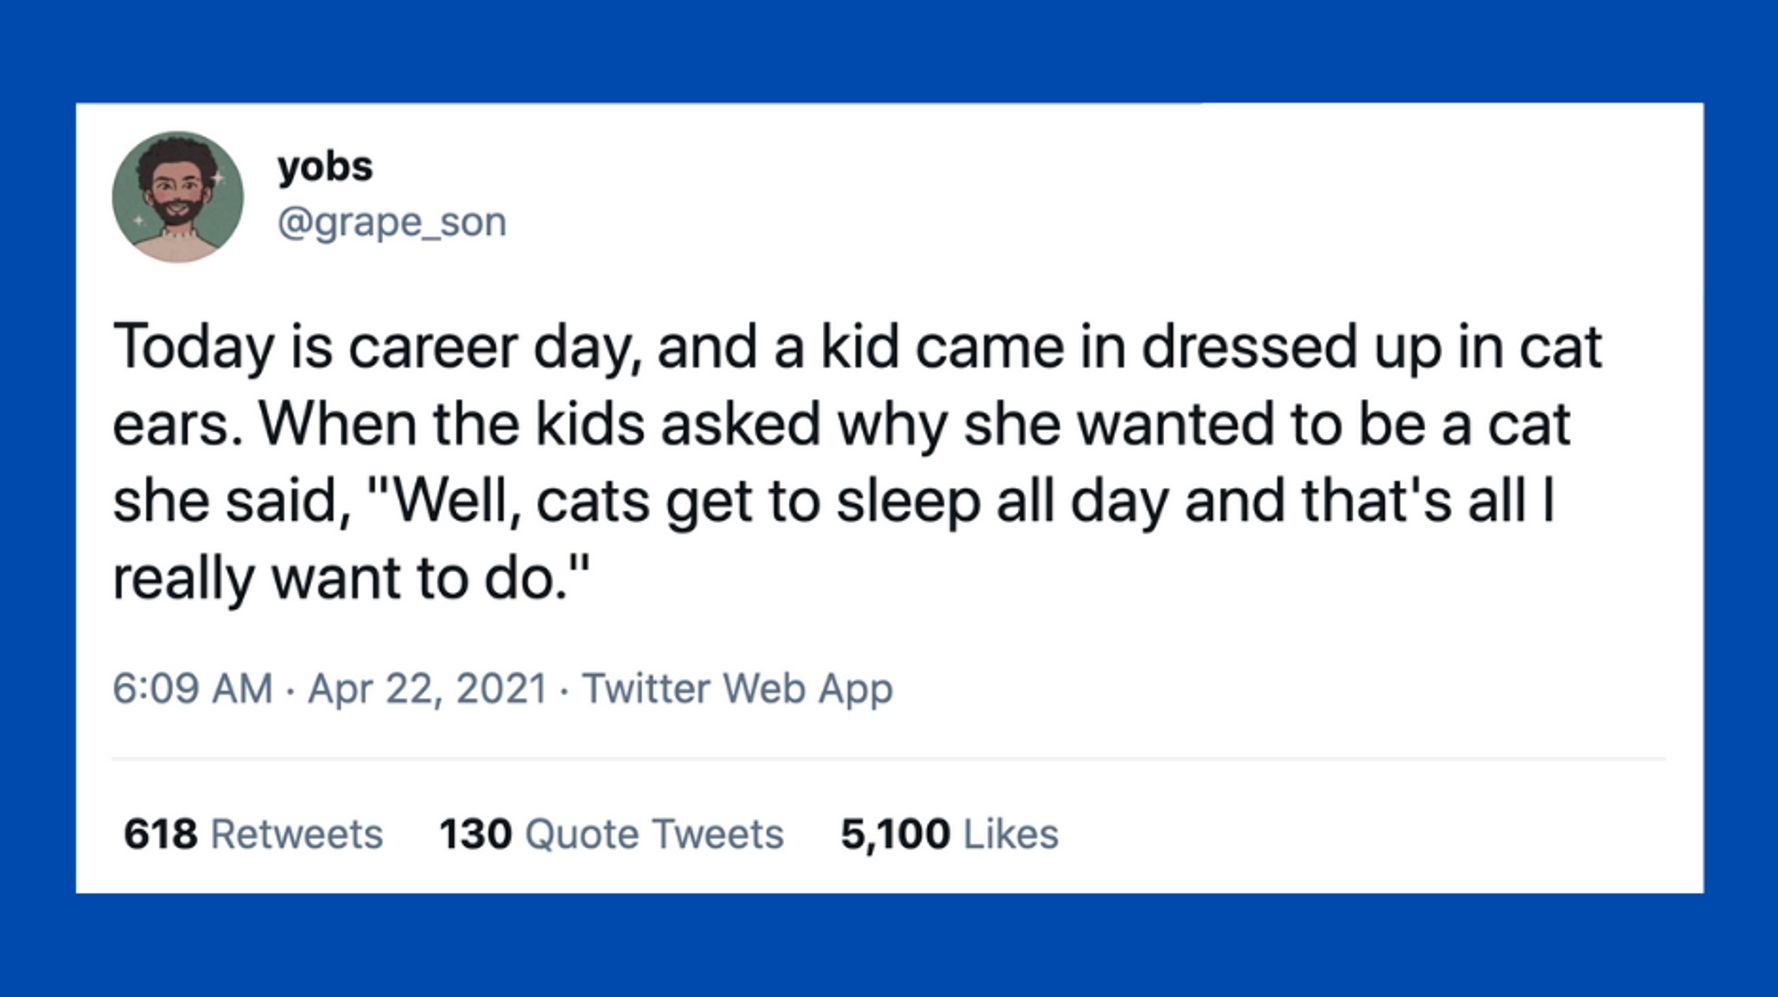 23 Of The Funniest Tweets About Cats And Dogs This Week (April 17-23)